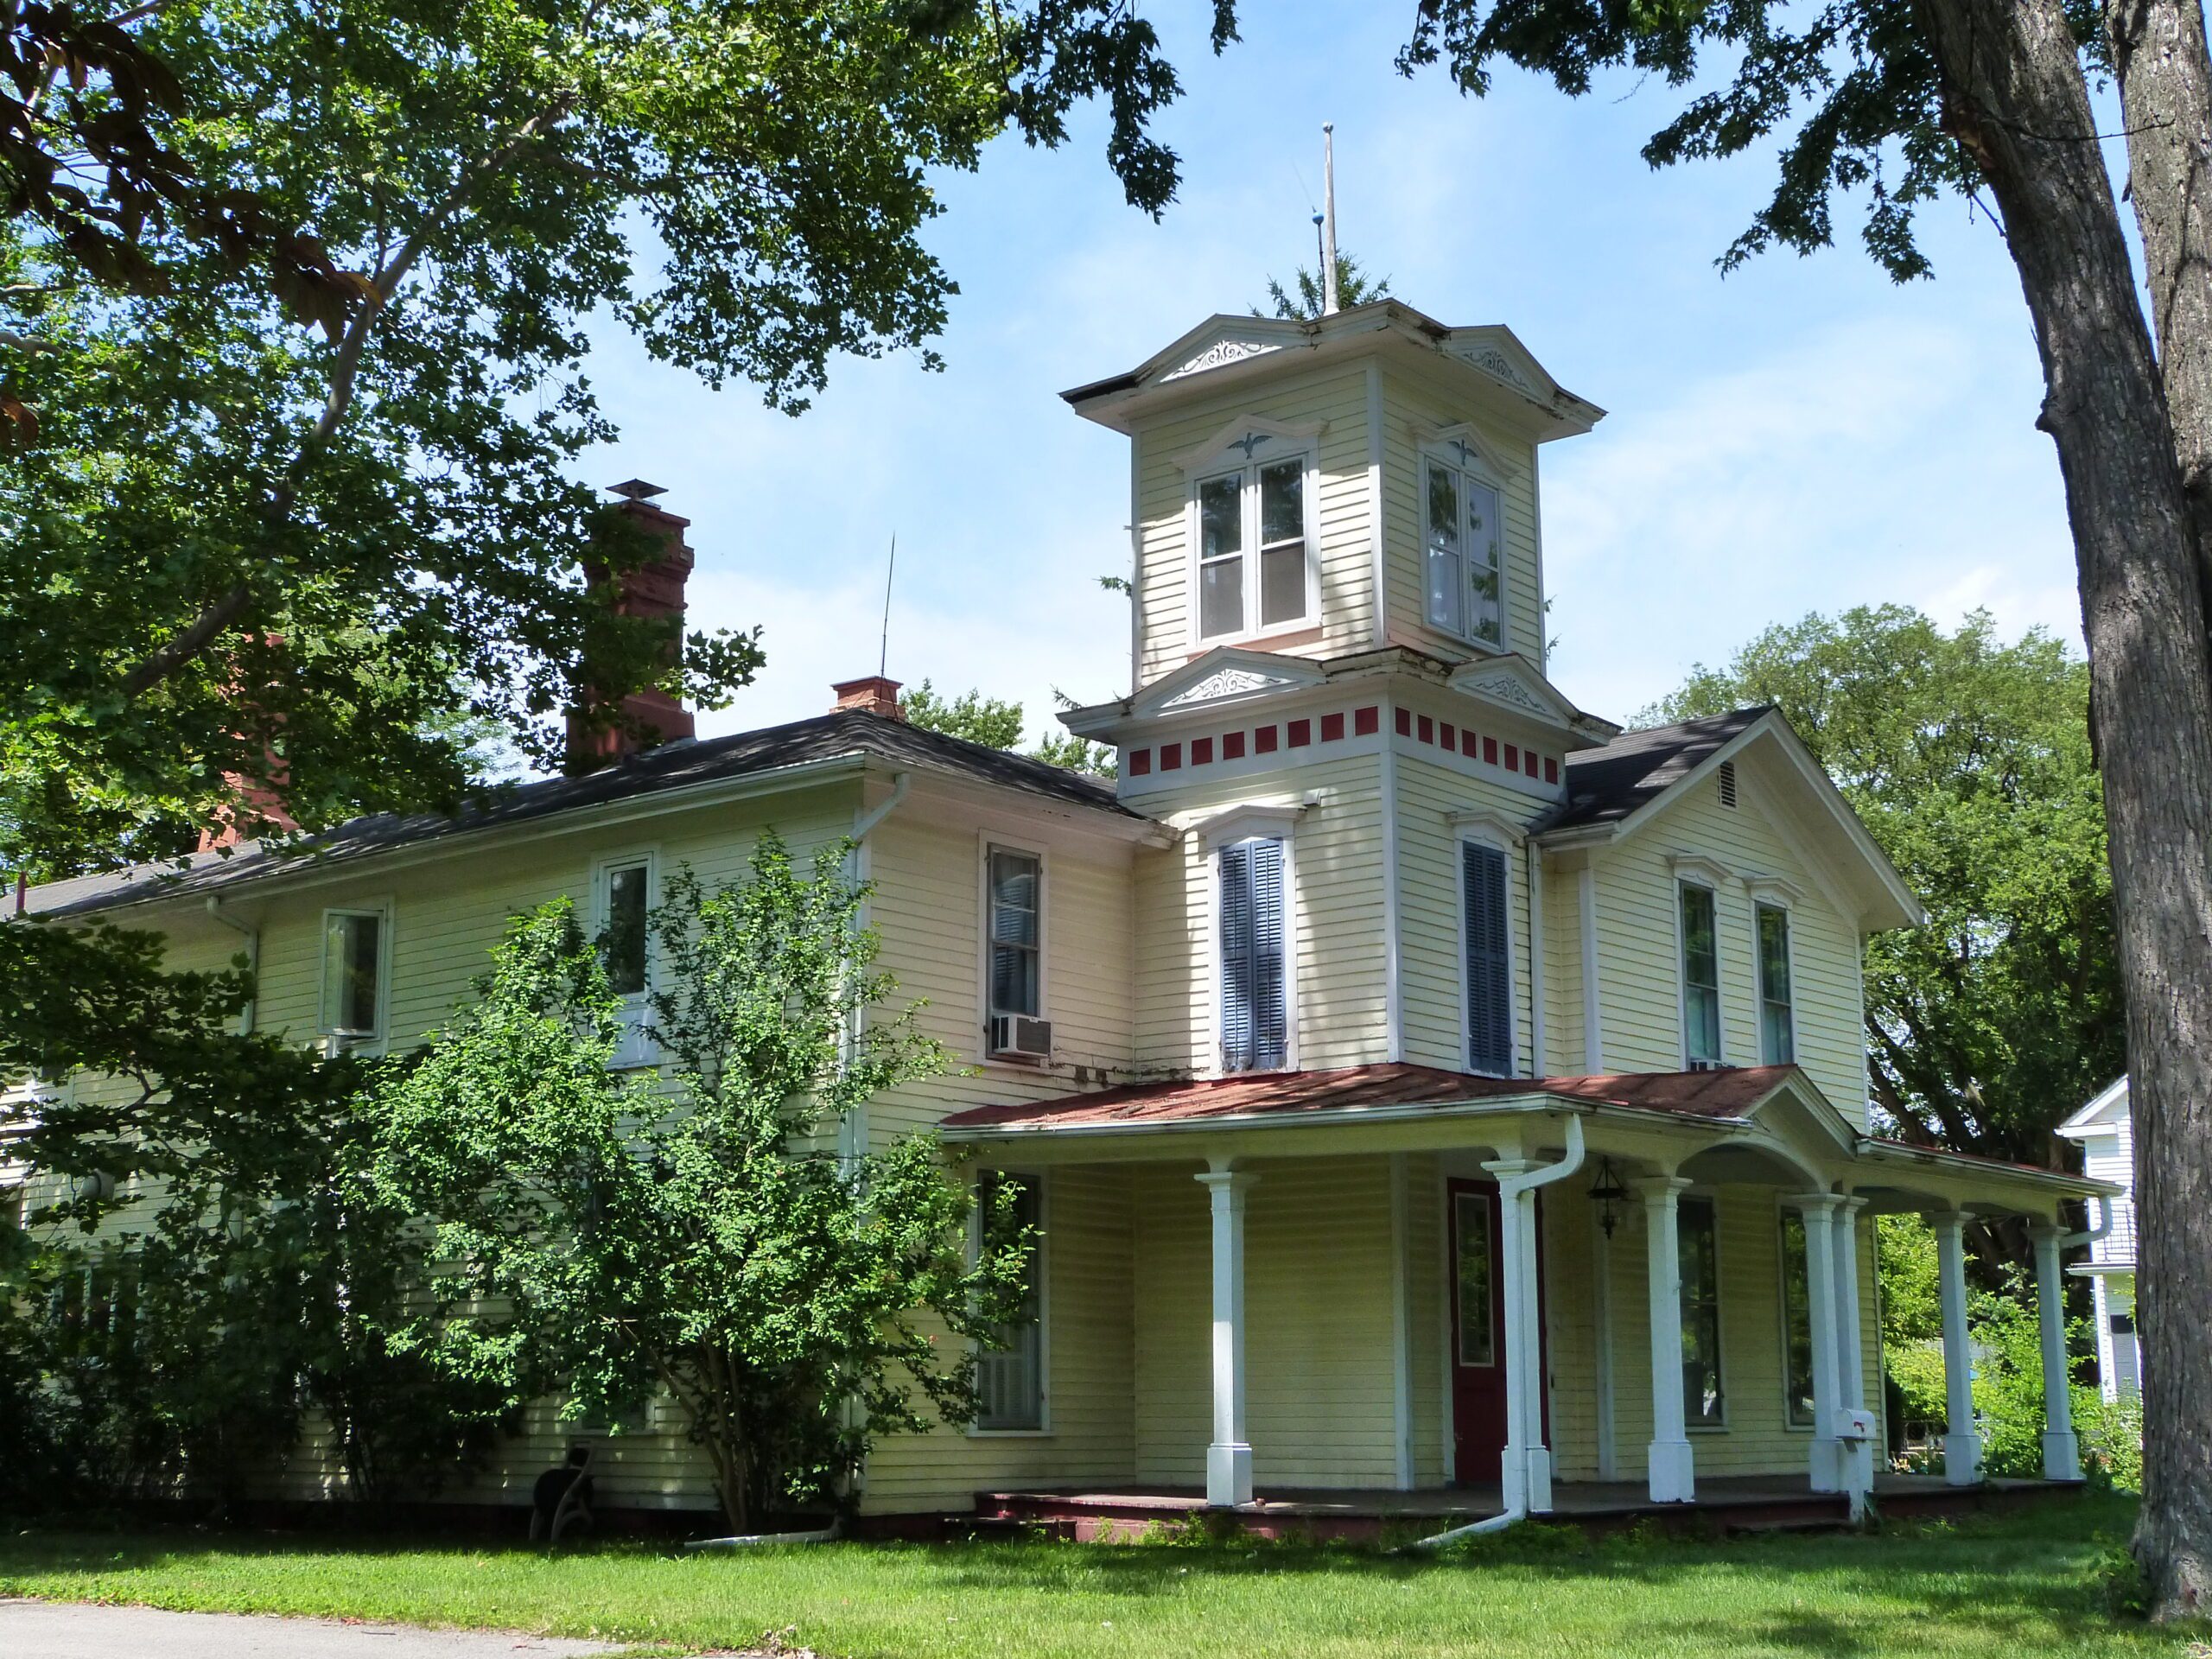 The historic Wright House in Saginaw, MI